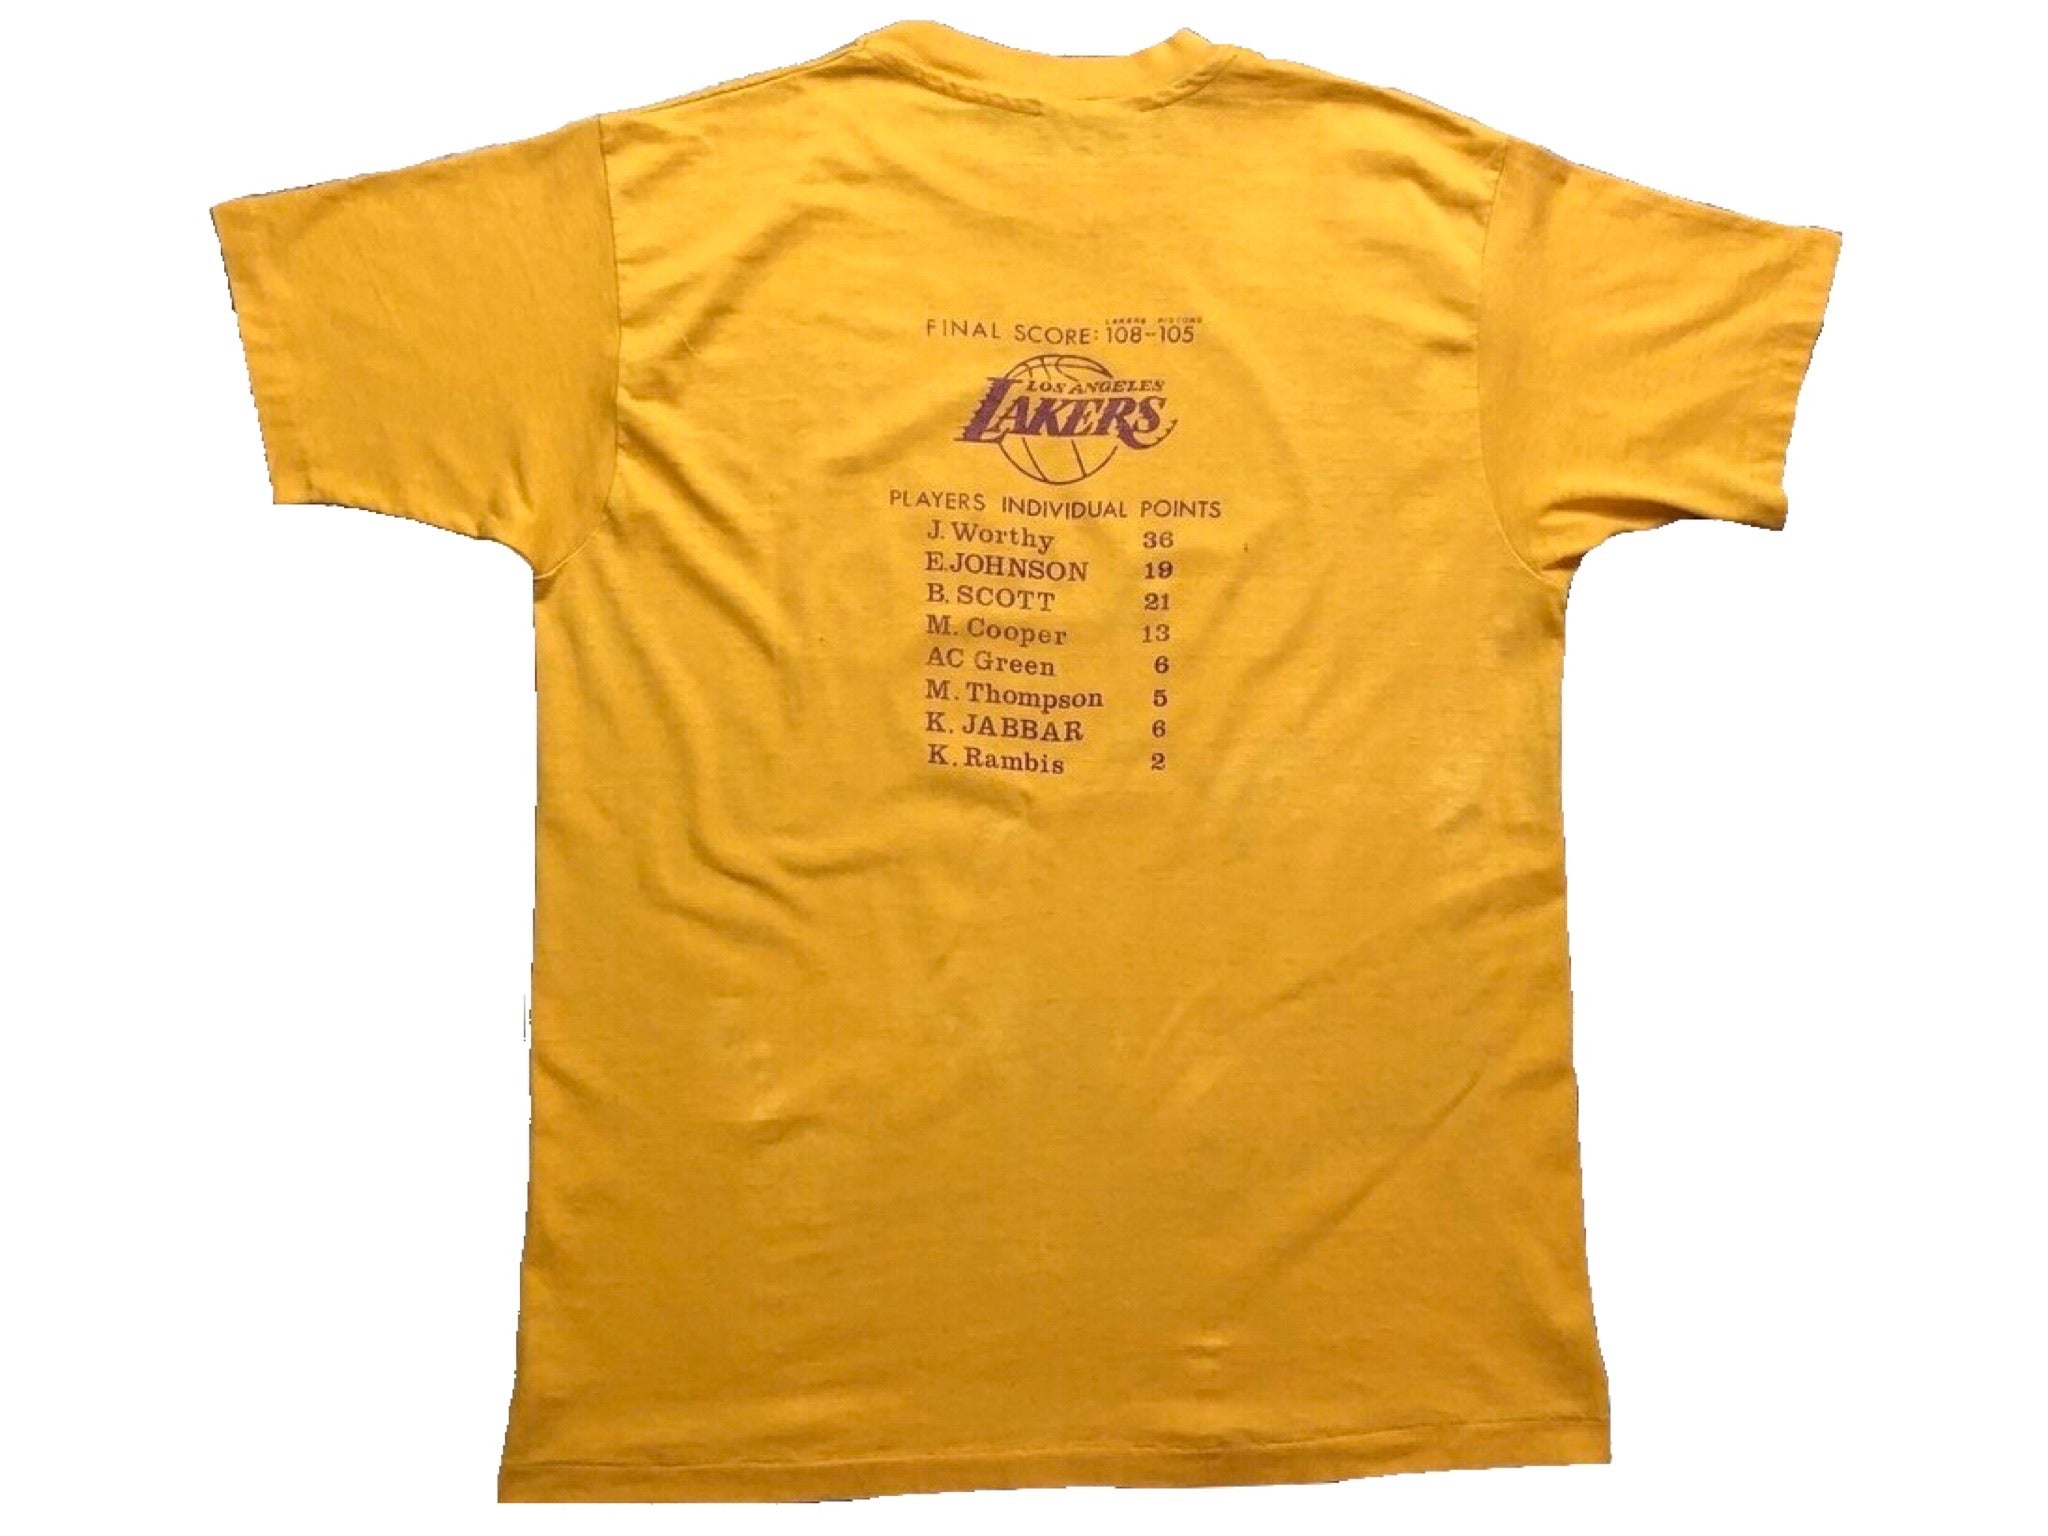 Los Angeles Lakers t-shirt size M